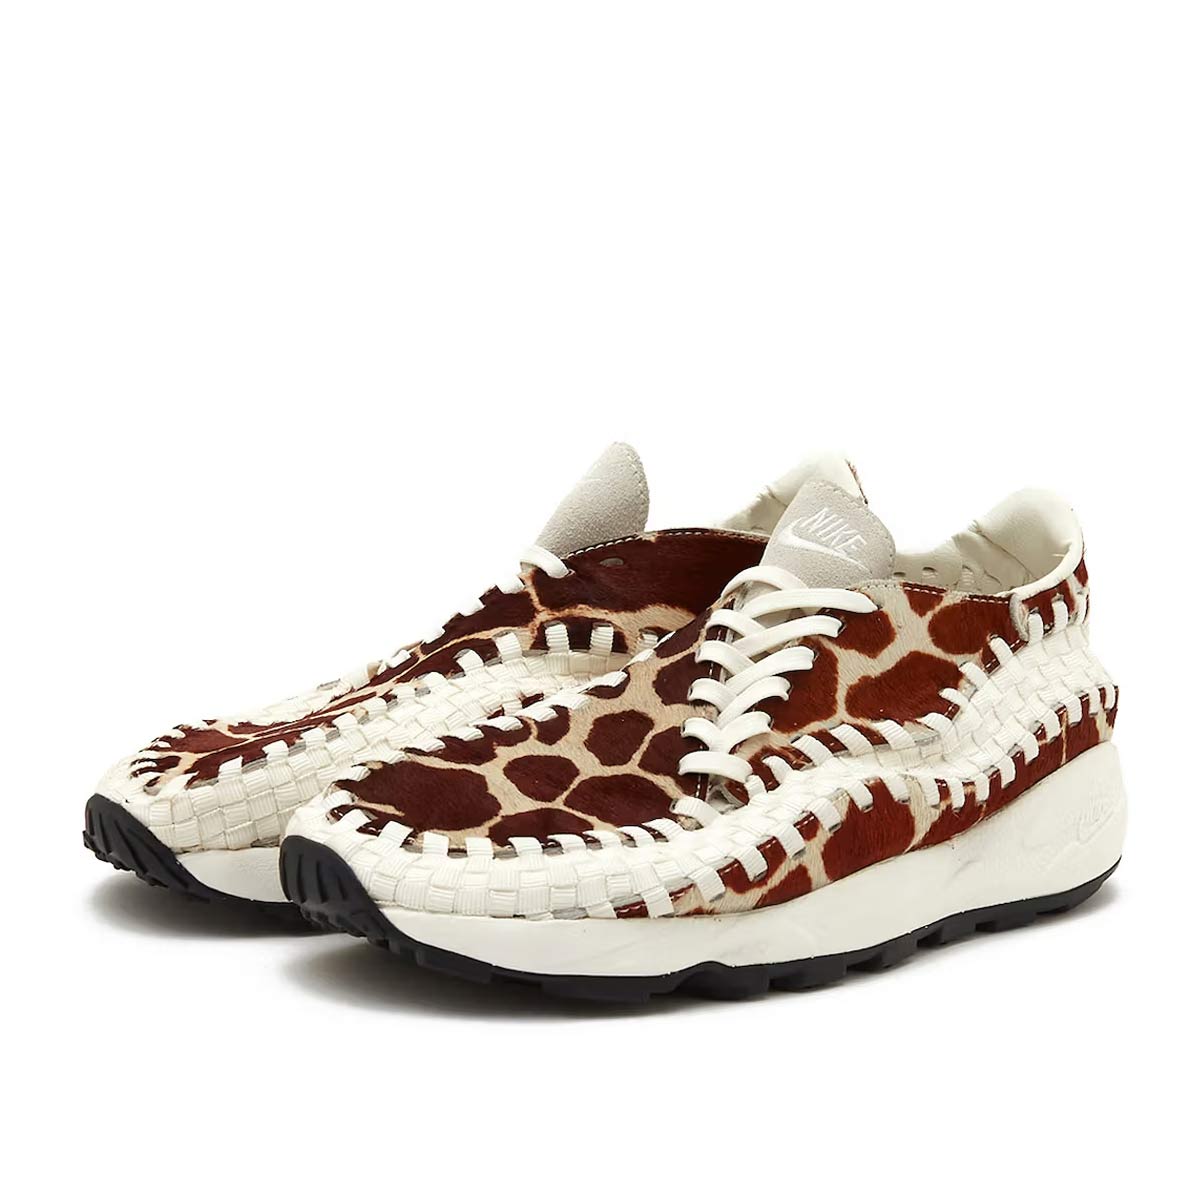 W Air Footscape Woven